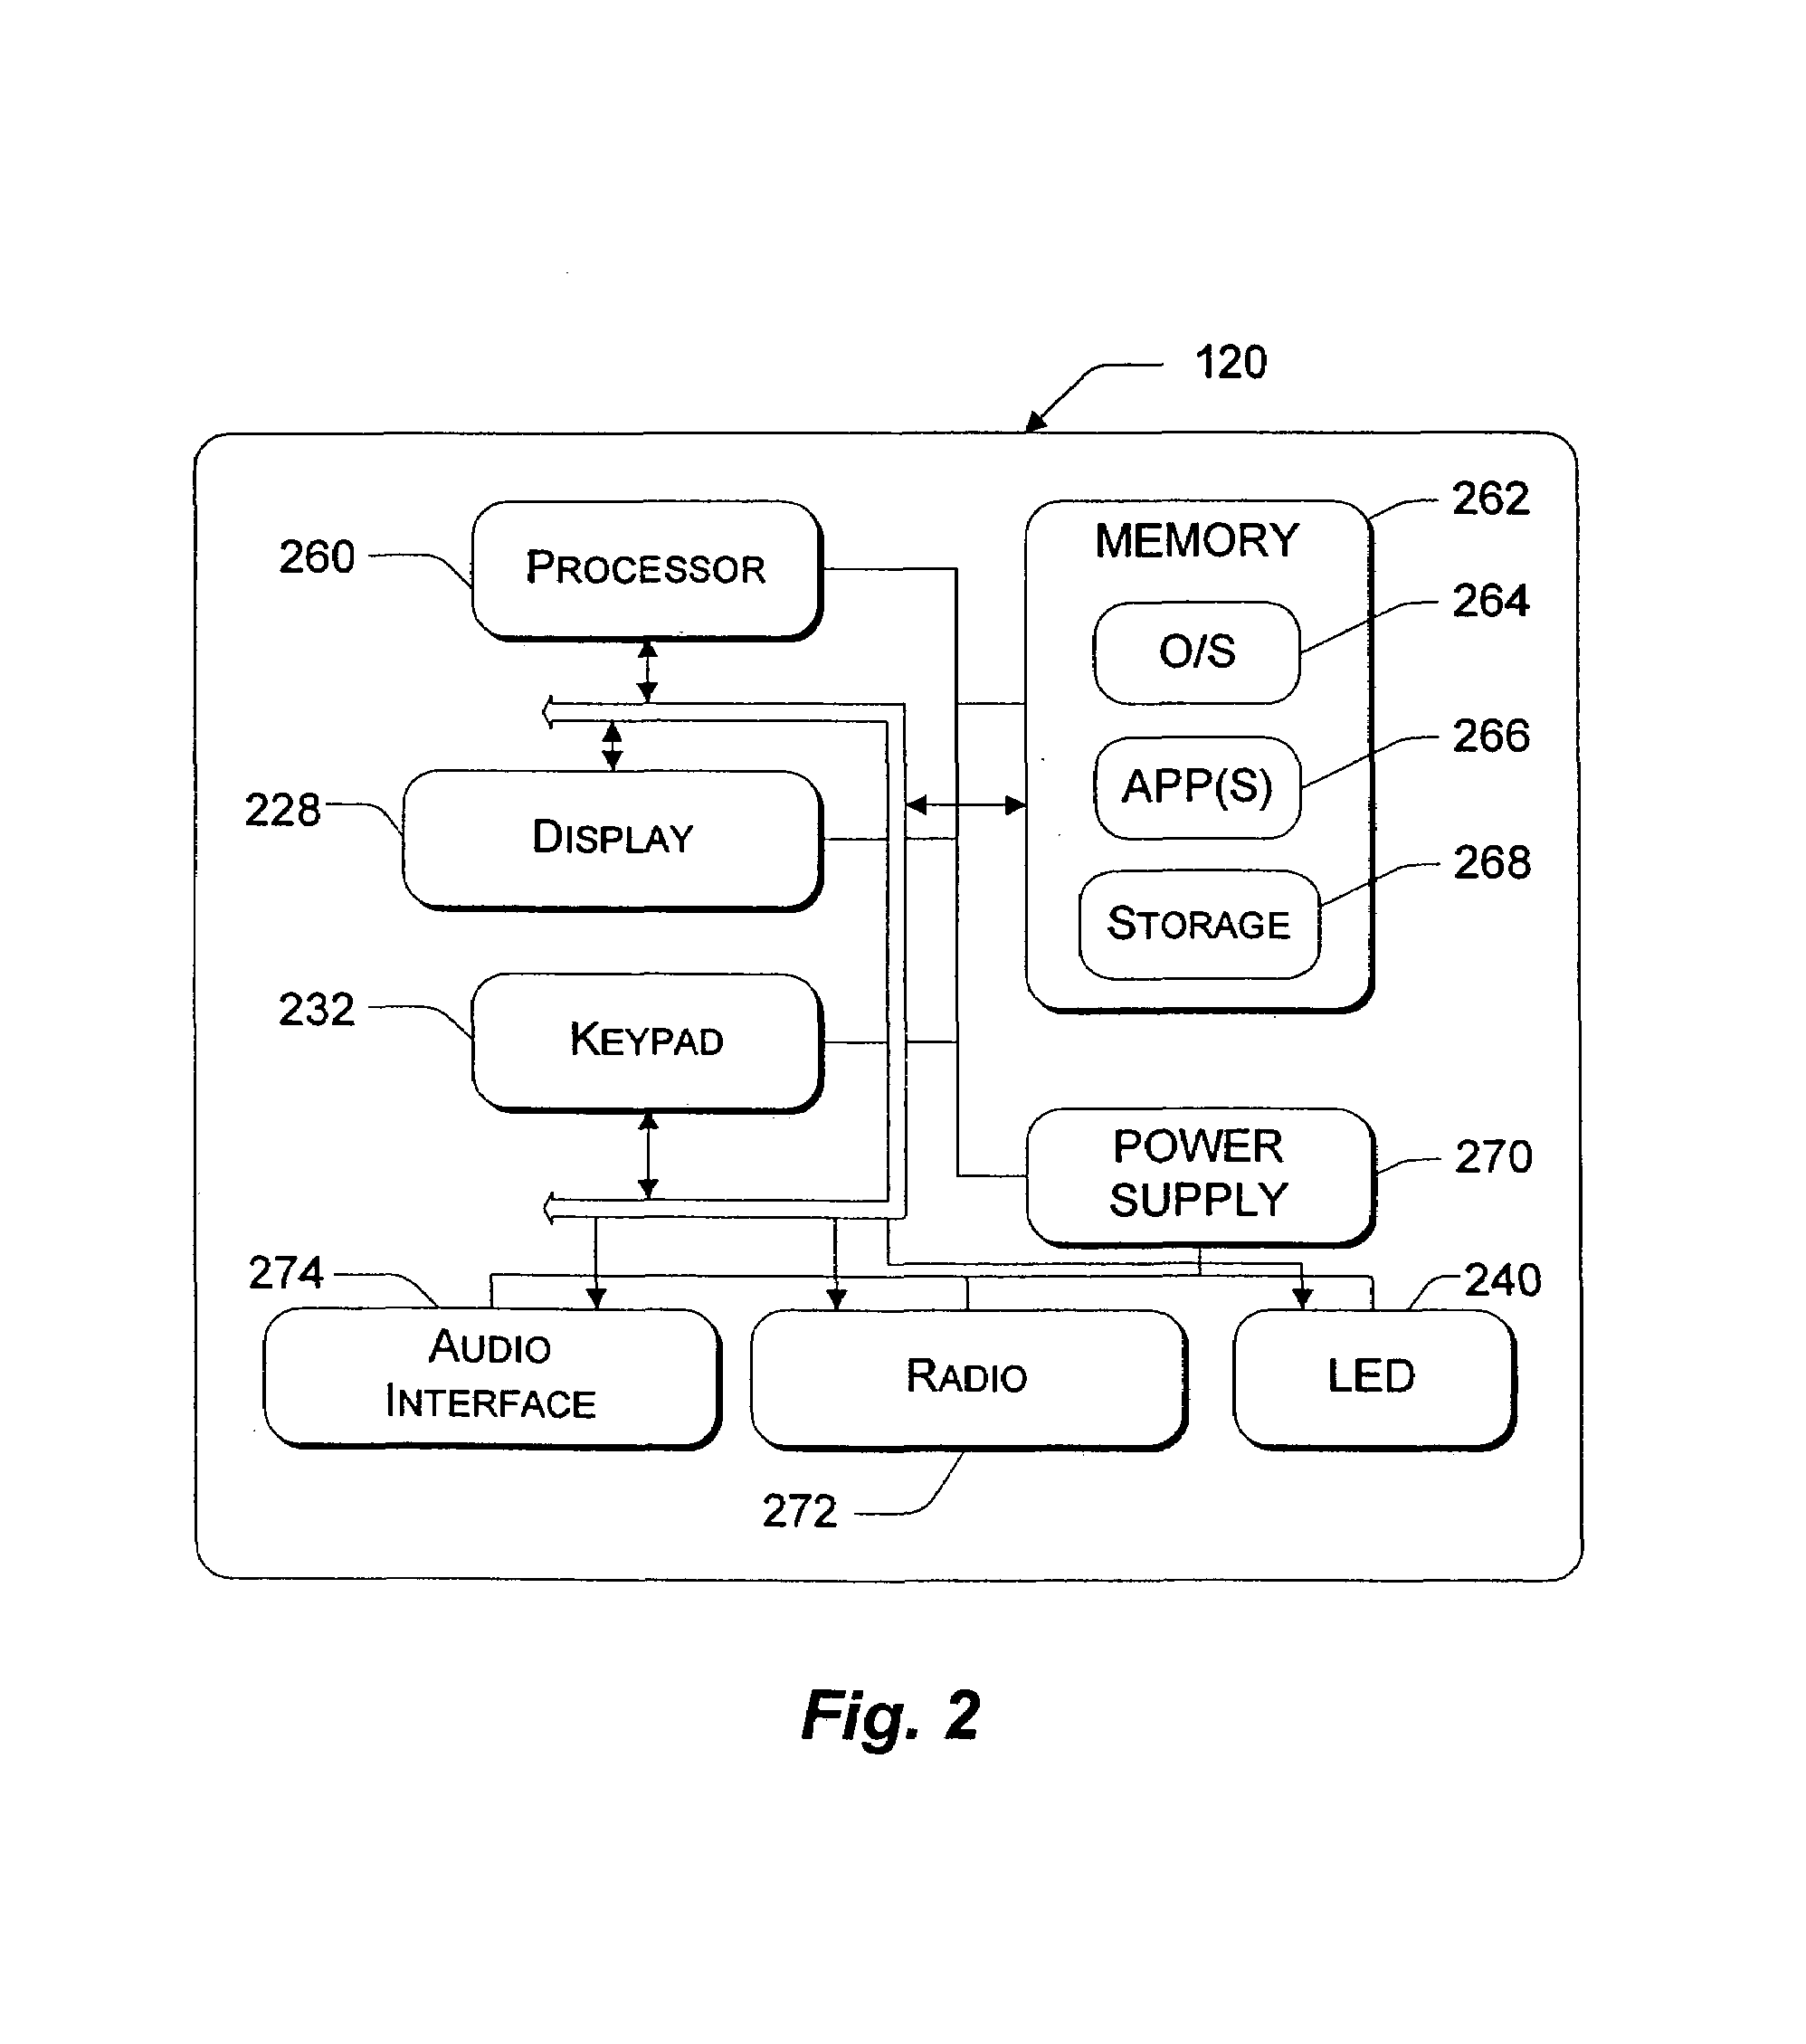 System and method to query settings on a mobile device